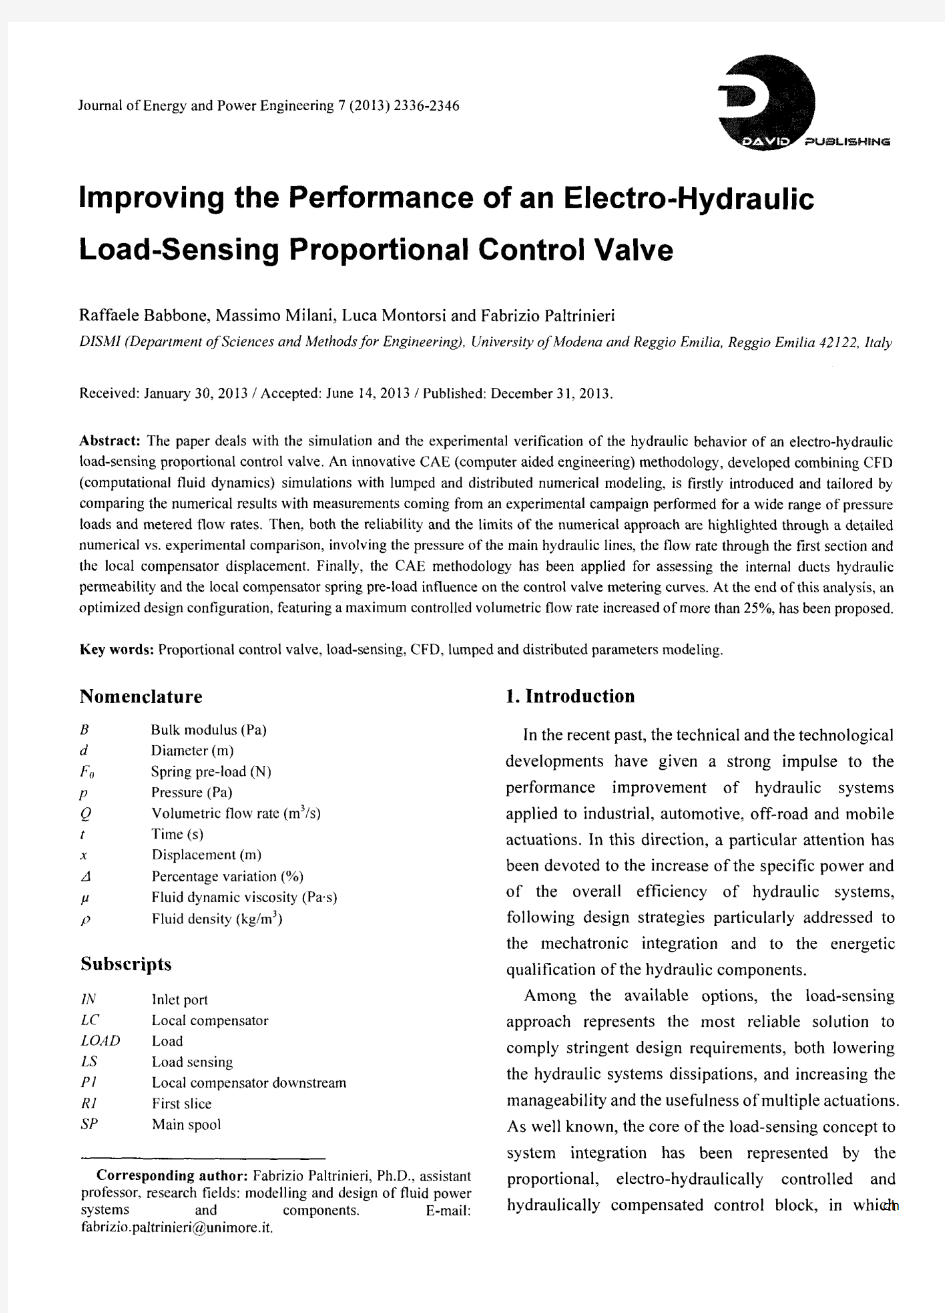 Improving the Performance of an Electro-Hydraulic Load-Sensing Proportional Control Valve